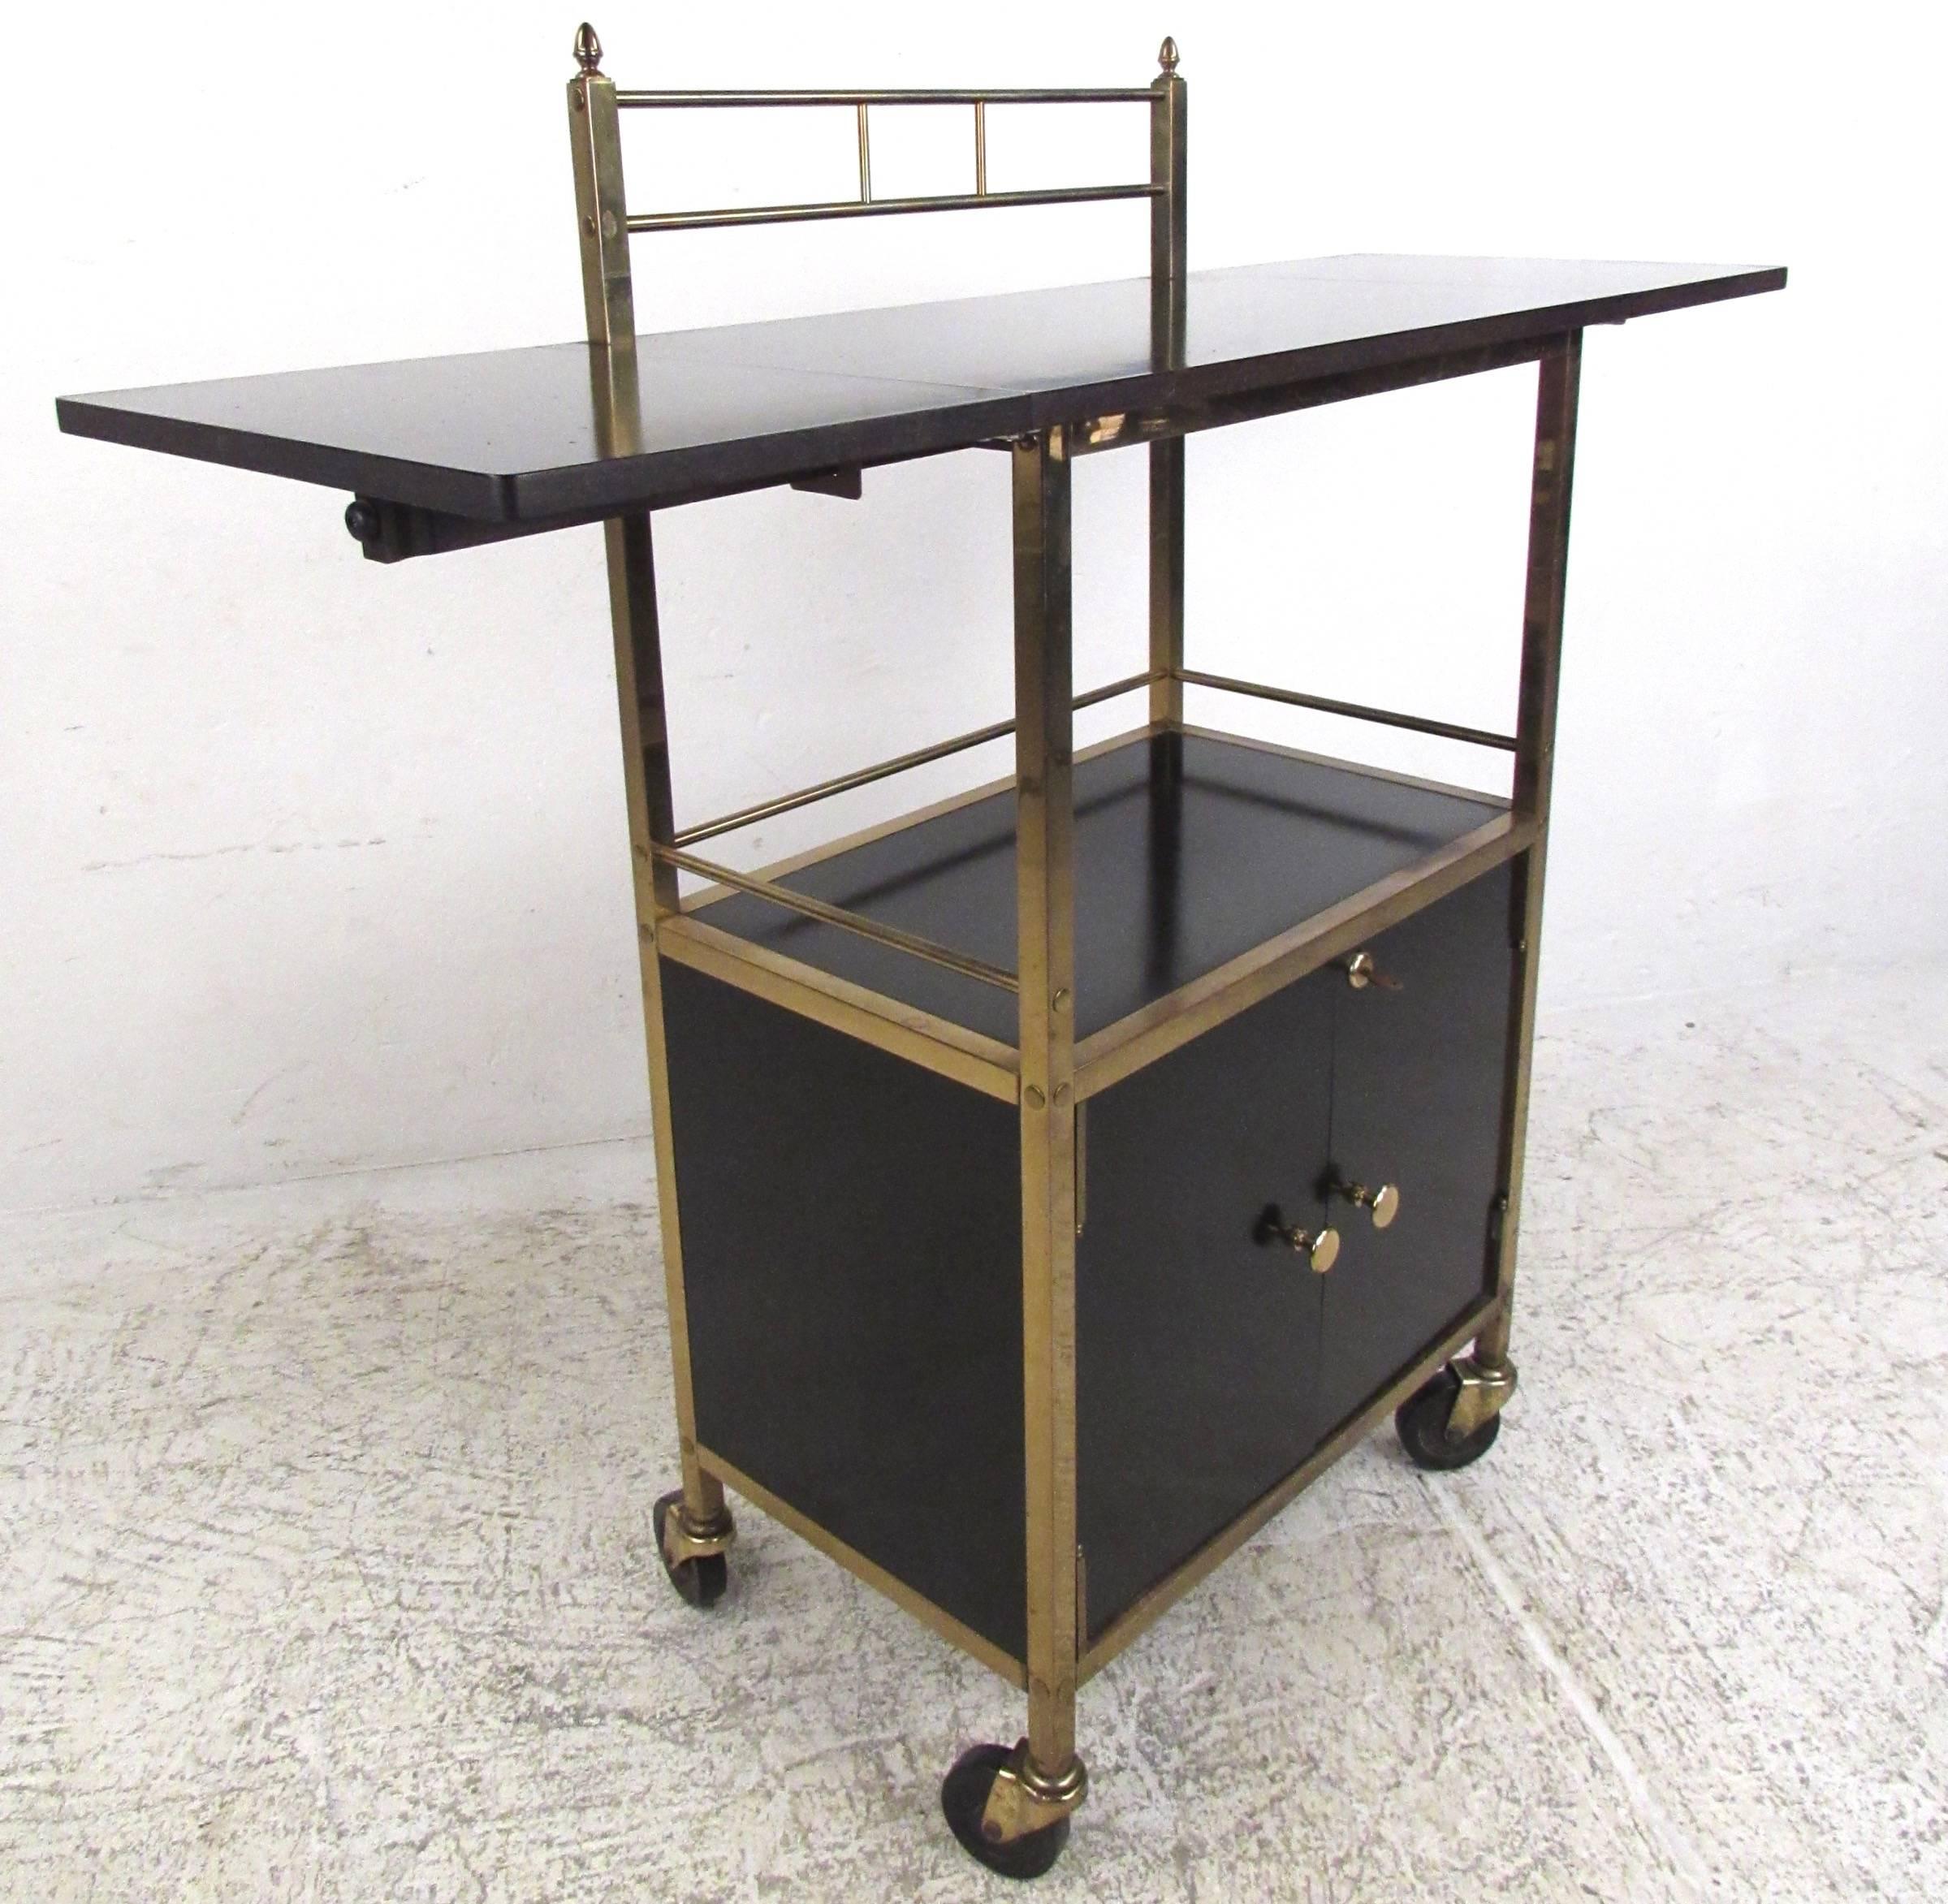 This unique vintage serving cart features a beautiful mix of black lacquered metal and brass details. Collapsible table top makes this service cart a versatile addition to any setting. Locking cabinet storage for liquor and plenty of shelf space for